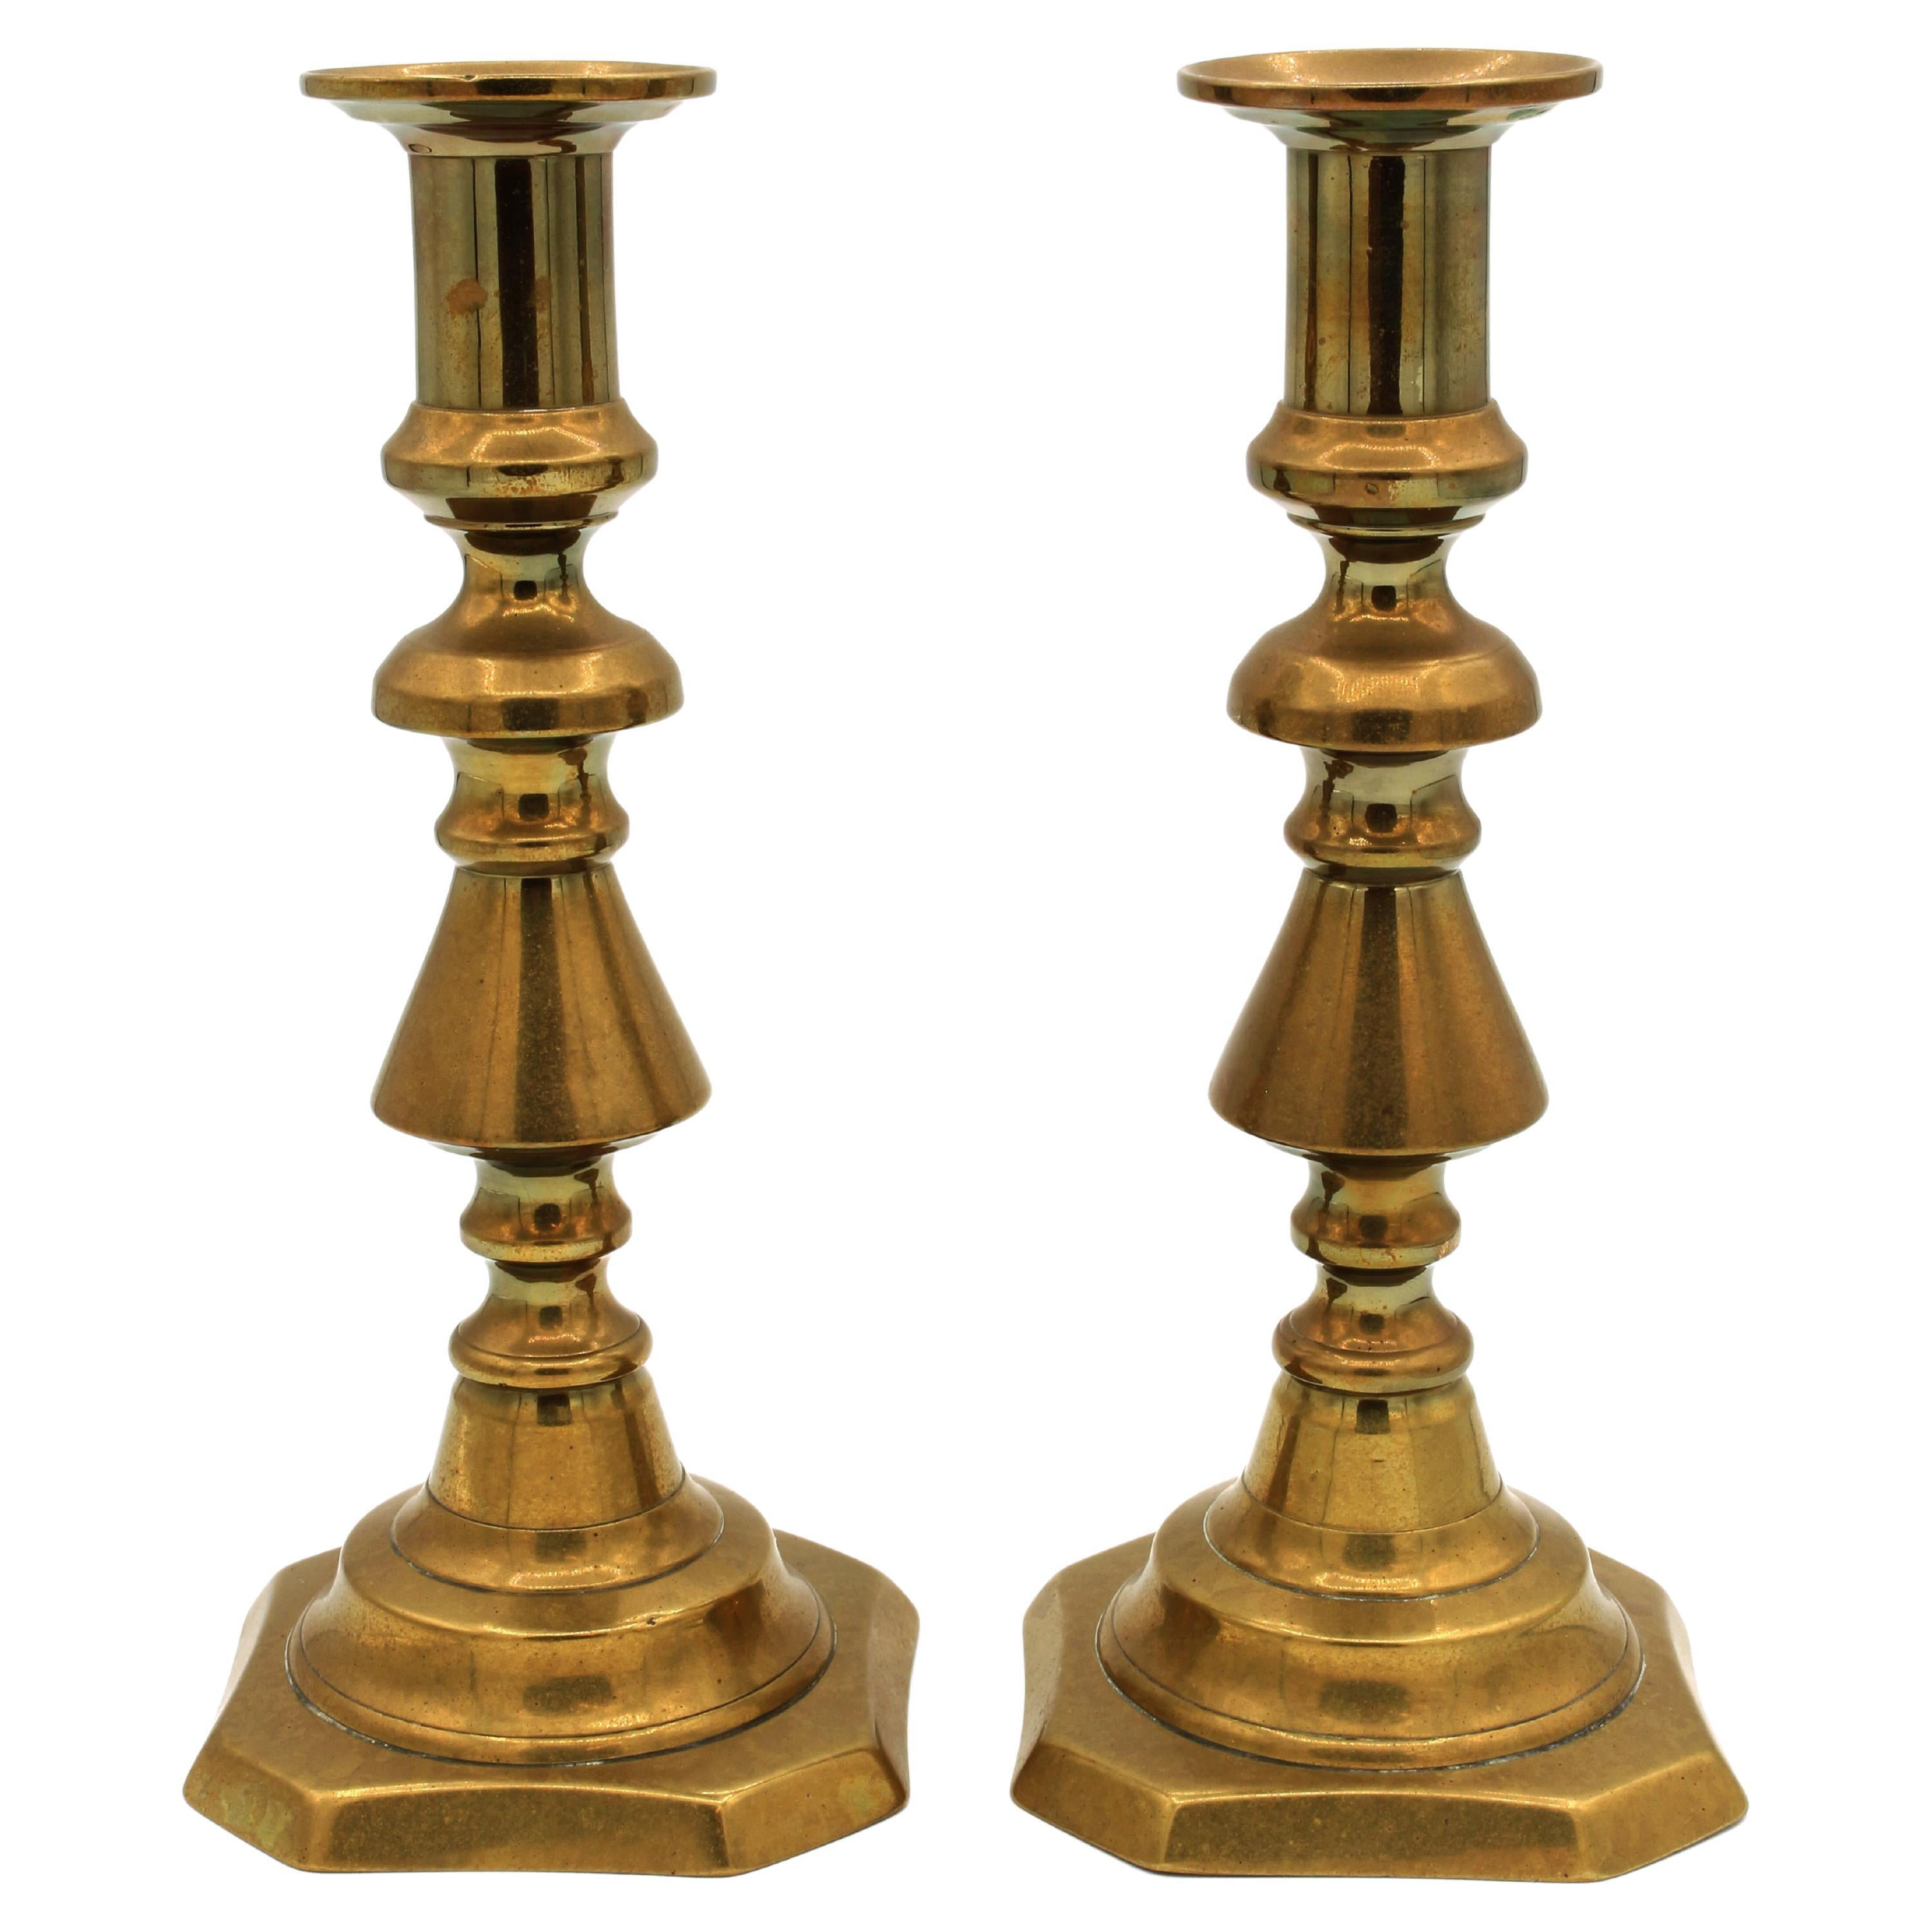 circa 1860-1880 Pair of English Brass Candlesticks For Sale